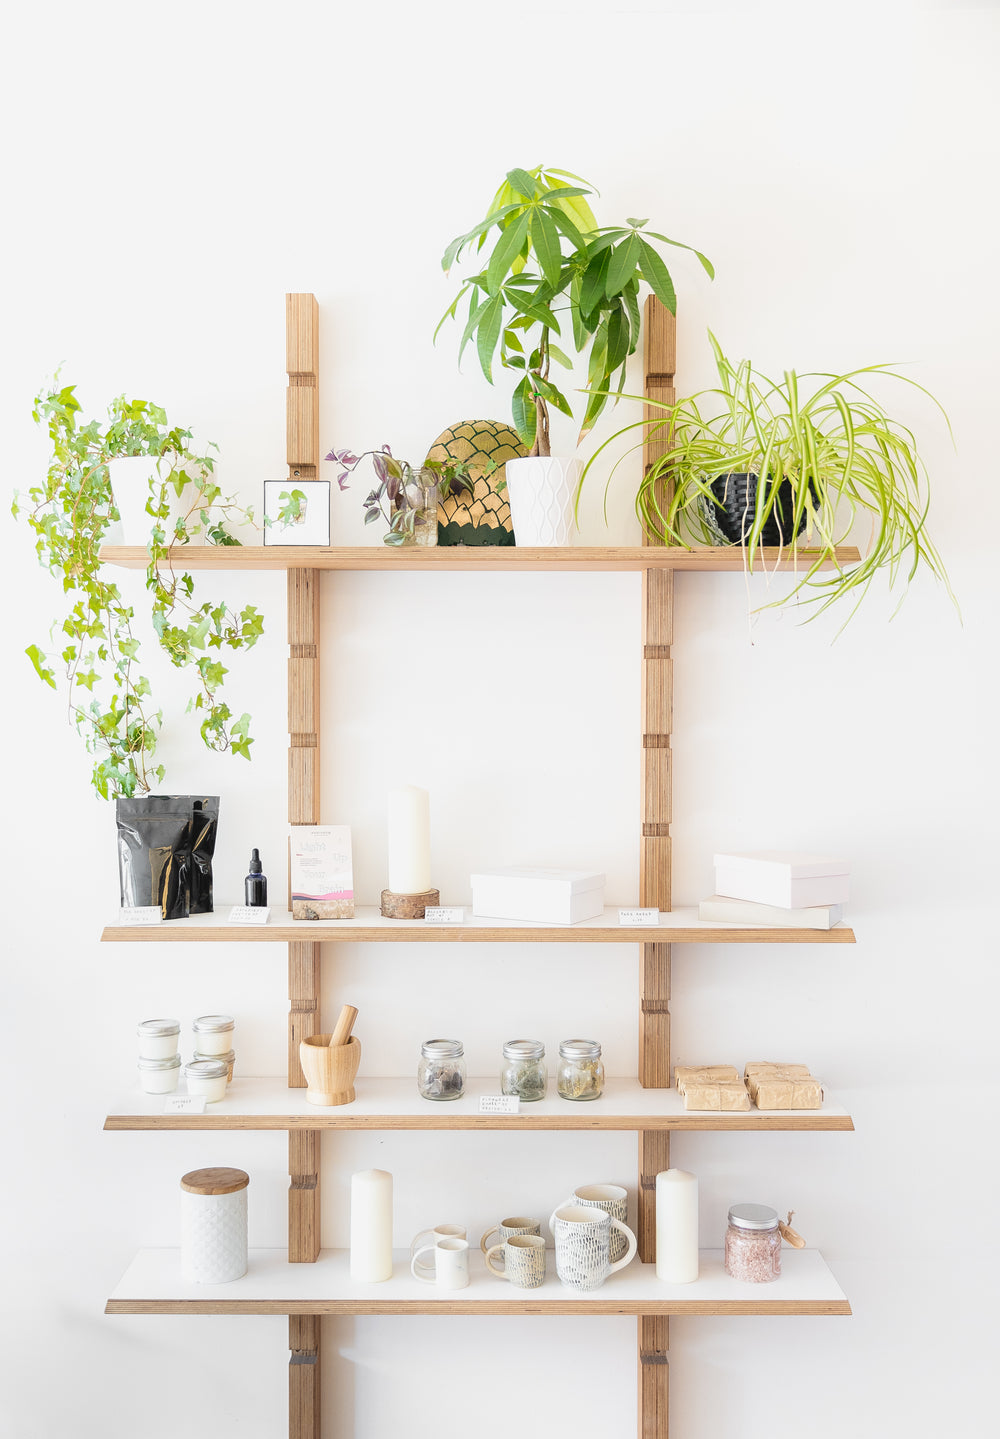 a selection of candles and plants on wooden shelves